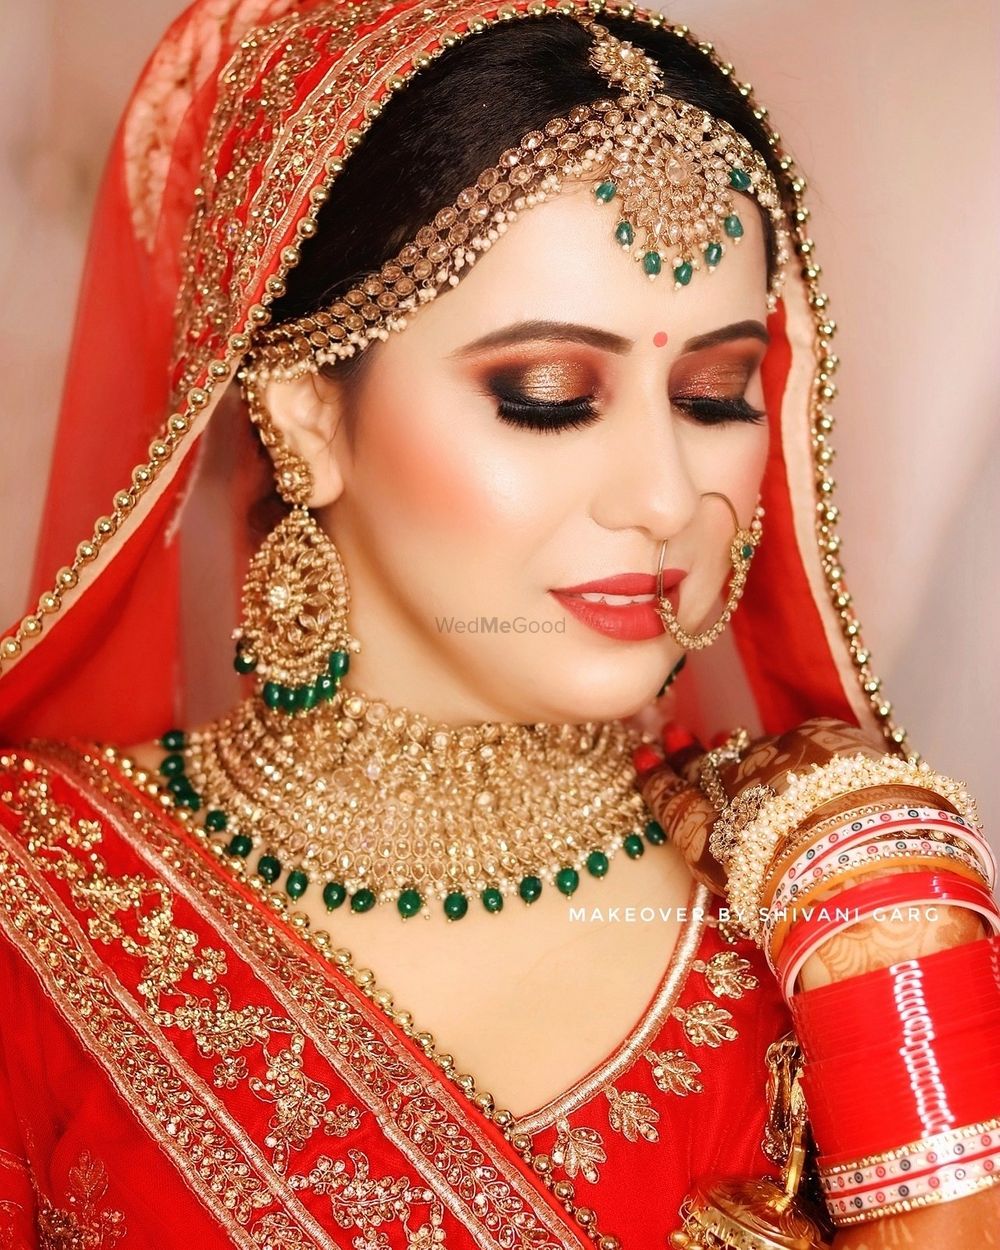 Photo From Traditional Bride - By Makeover by Shivani Garg